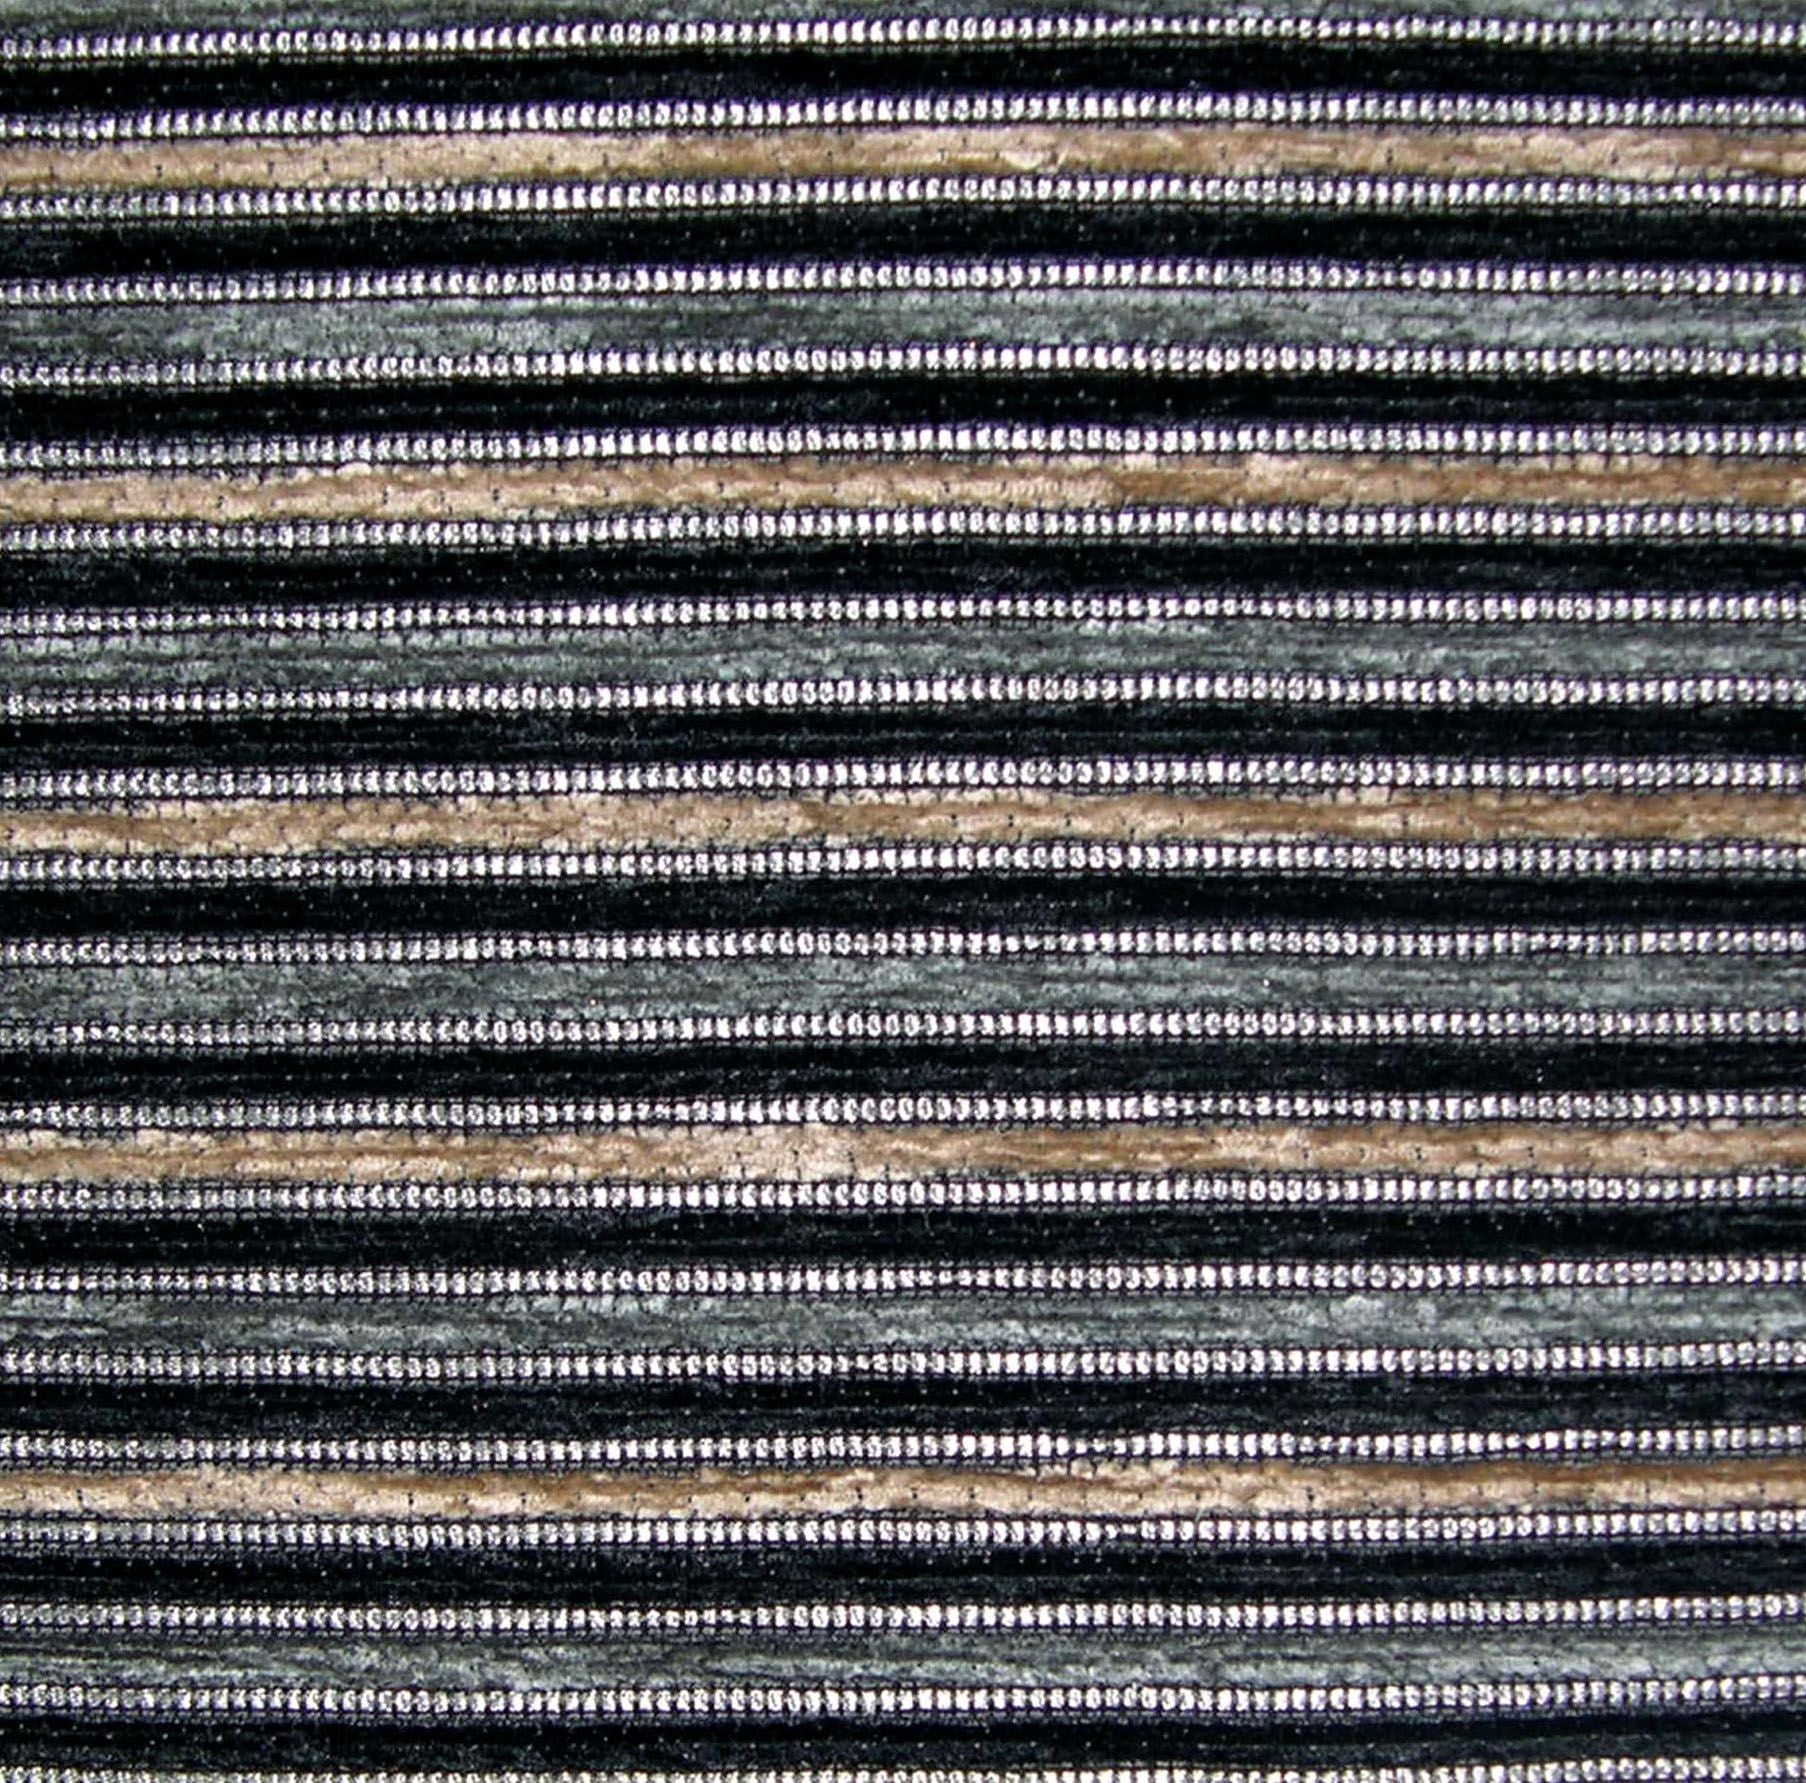 Gilcrest fabric in silvershadow color - pattern number VC 01291106 - by Scalamandre in the Old World Weavers collection